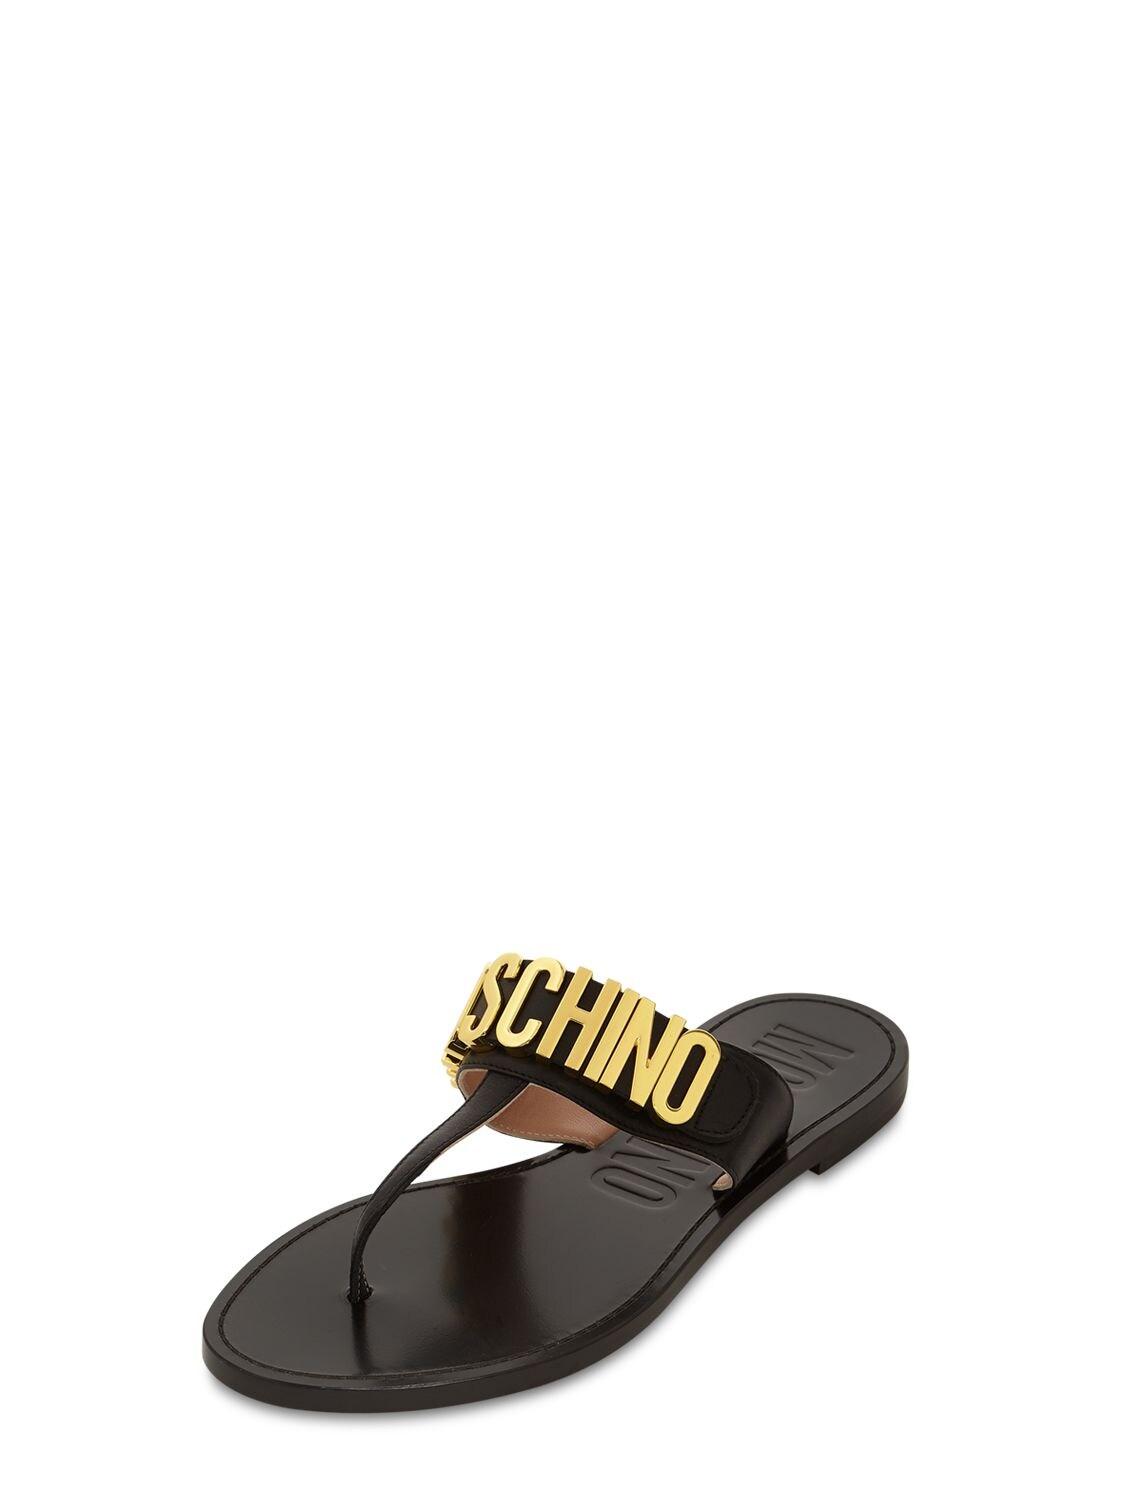 Moschino 15mm Leather Thong Sandals in Black | Lyst